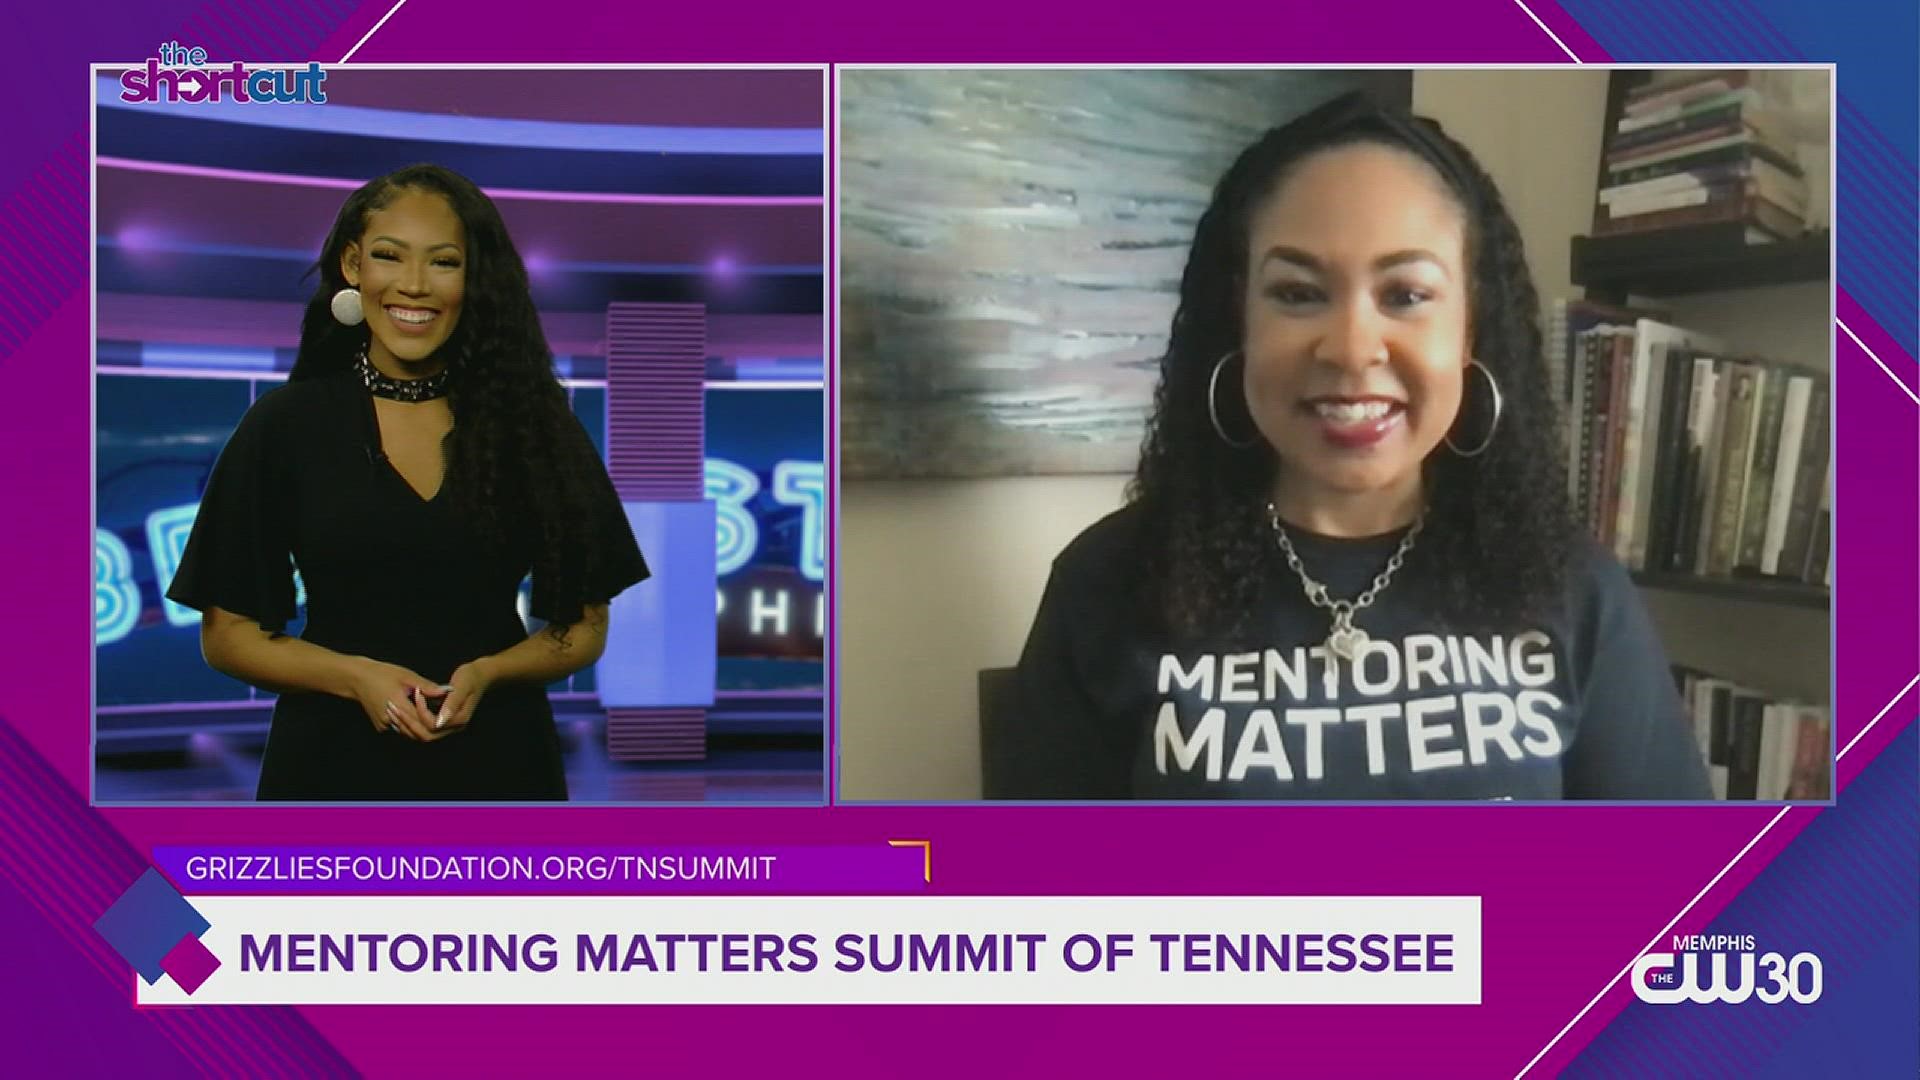 Ever wanted to make a positive change in a child's life? In that case, check out Mentor Memphis Grizzle's upcoming Mentoring Matters Summit of Tennessee conference!